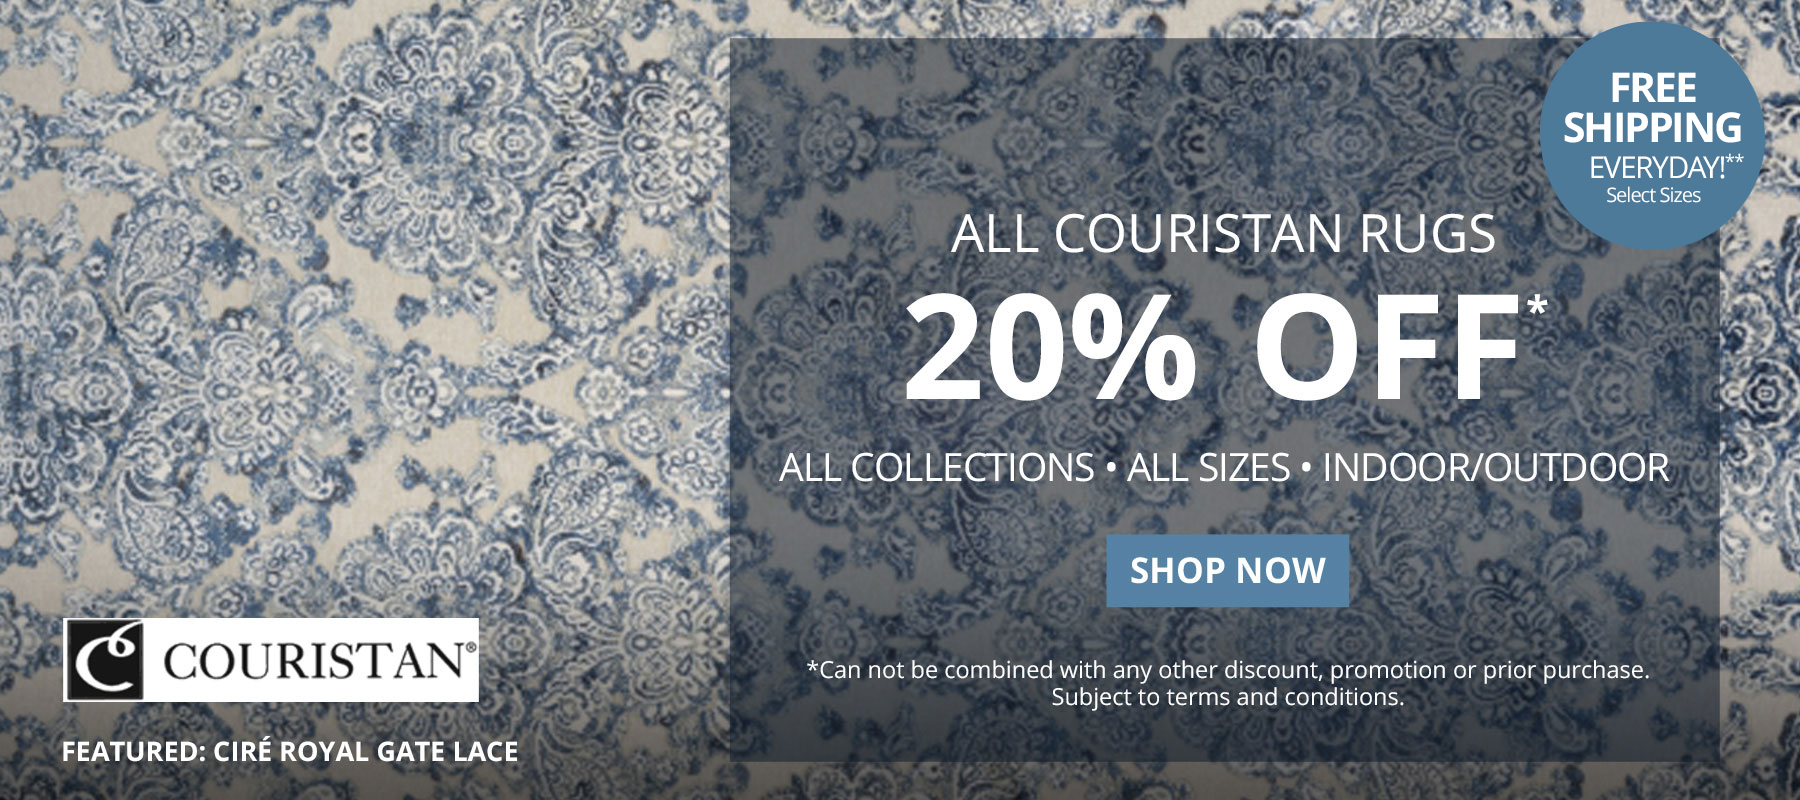 All Couristan Rugs 25% Off*. All Collections - All Sizes - Indoor/Outdoor. Free Shipping Everyday!** Select Sizes. *Can not be combined with any other discount, promotion or prior purchase. Subject to terms and conditions. Shop Now.